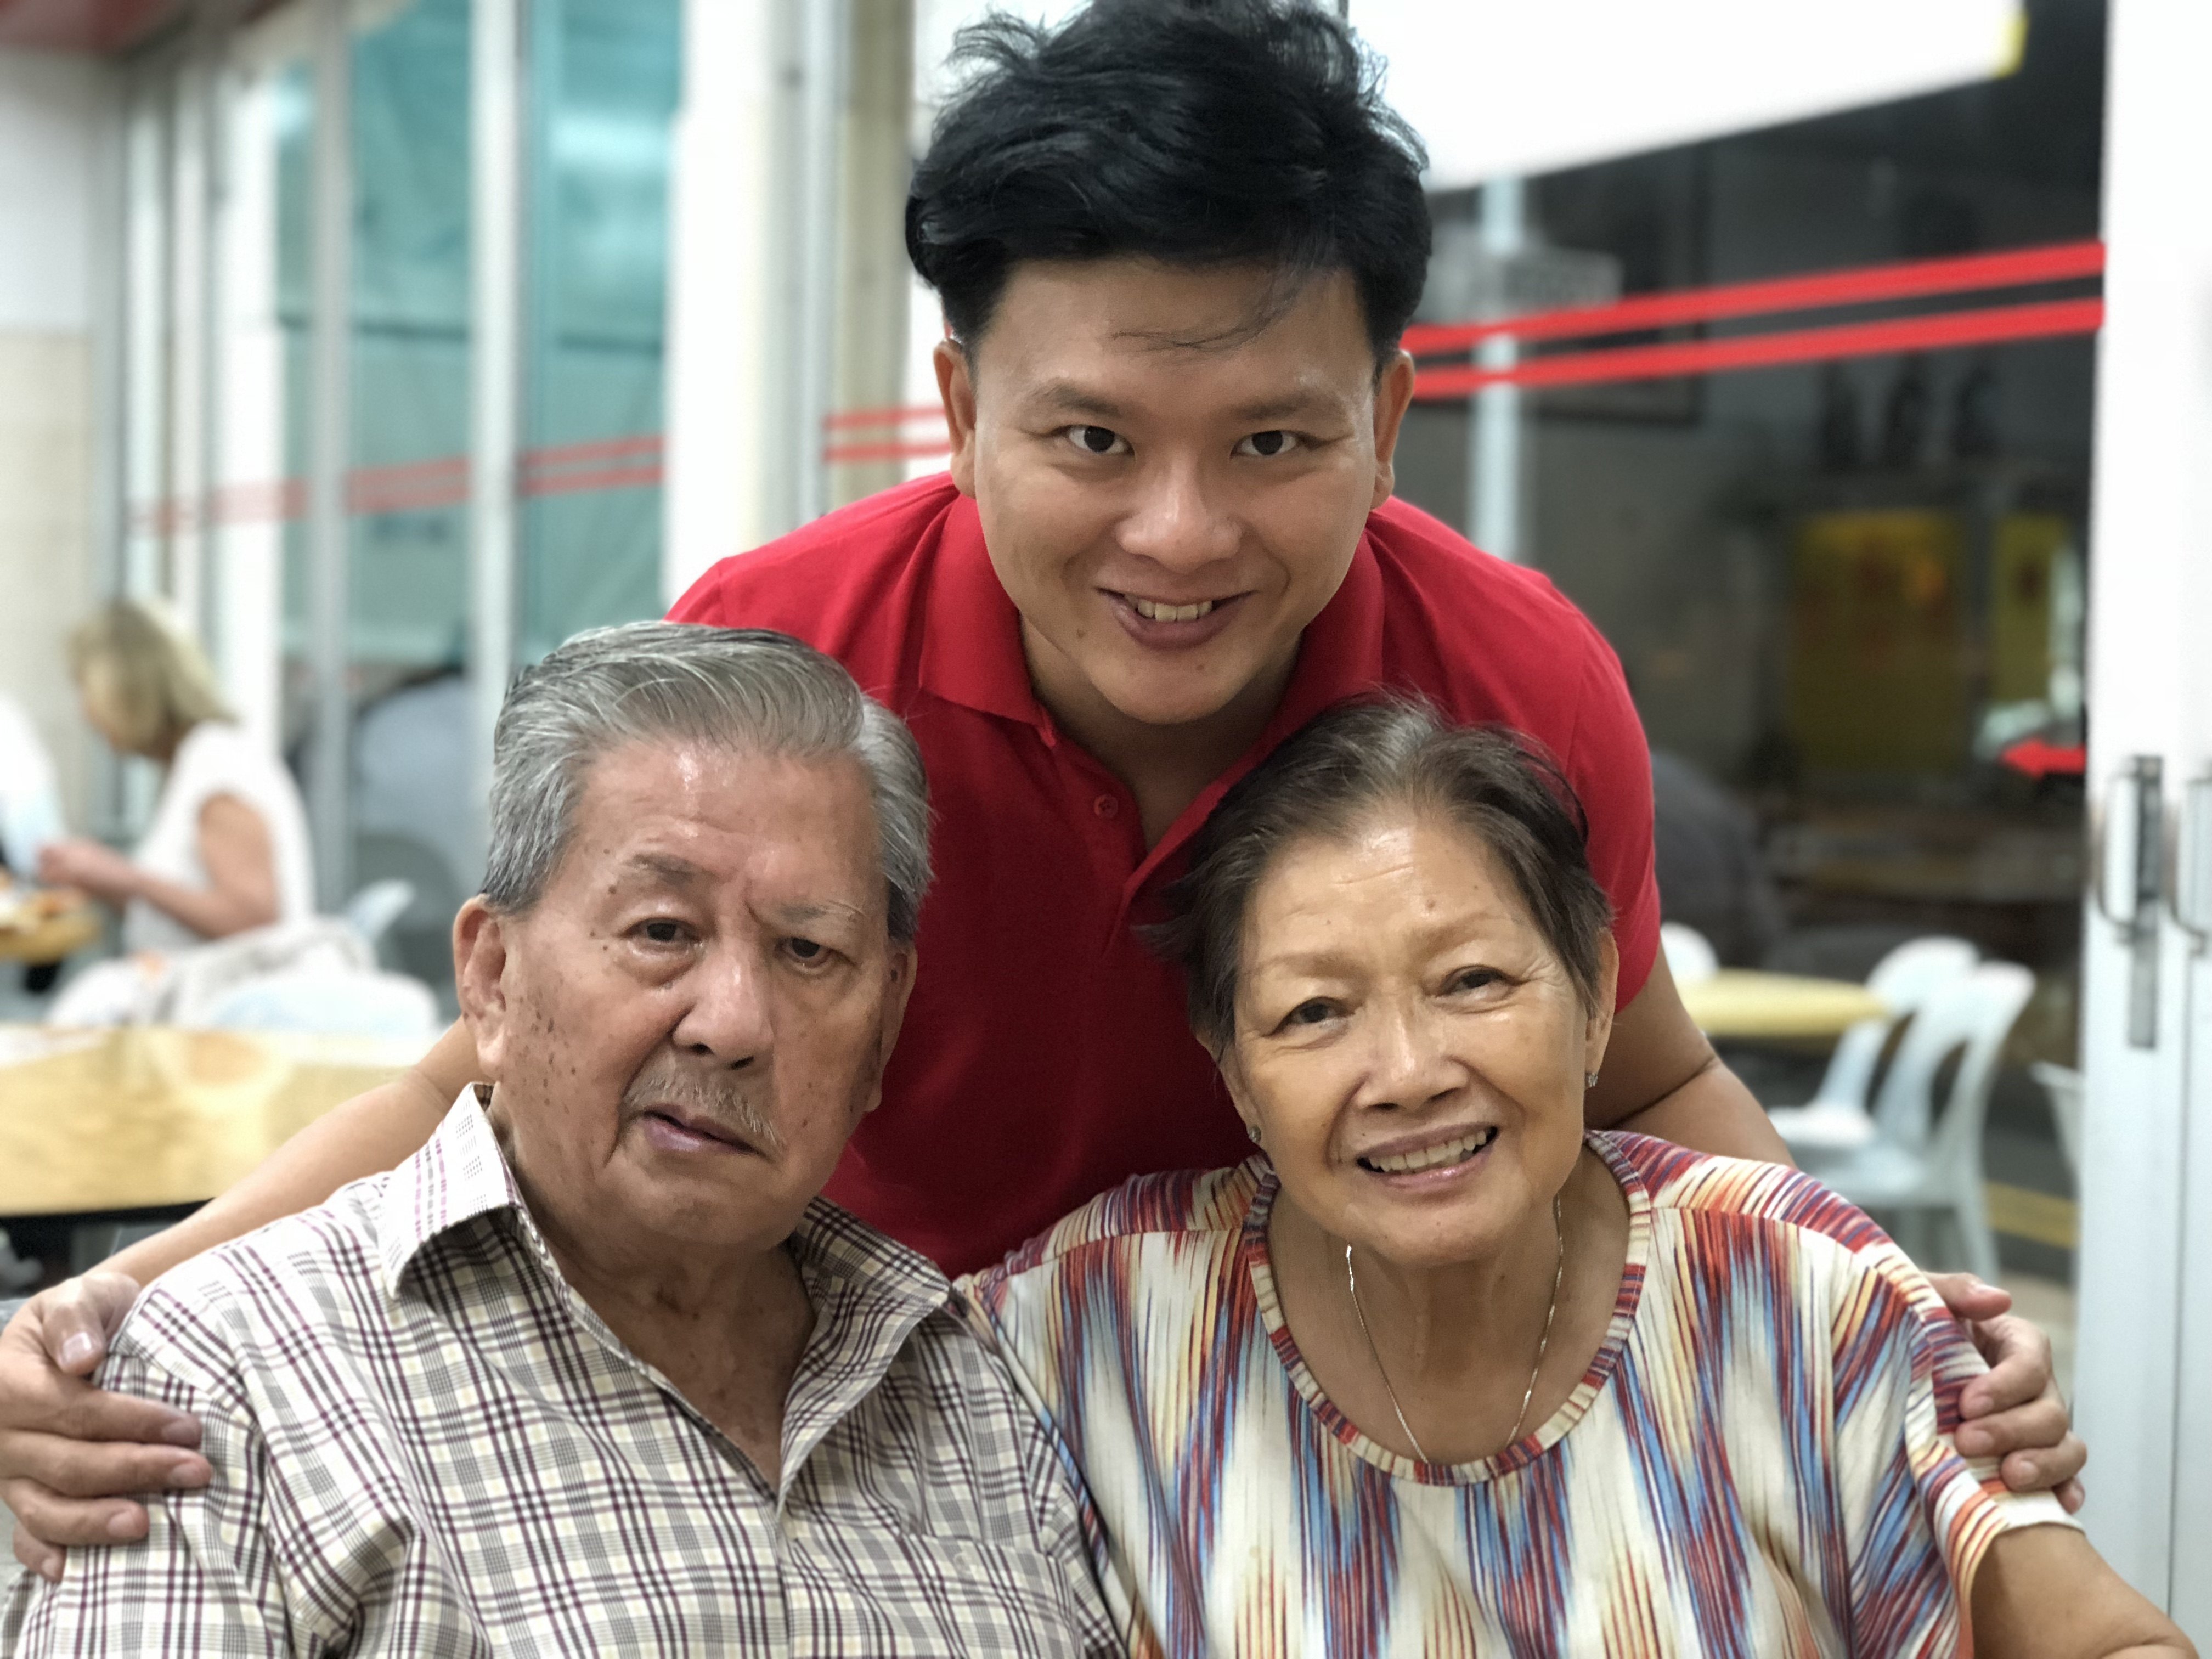 An only child, Singaporean Daniel Lim (centre) had to step into a carer role at 30 when his parents’ health deteriorated. He shares how he came back from carer burnout – physical, emotional and mental exhaustion from constantly taking care of someone else. Photo: courtesy of Daniel Lim